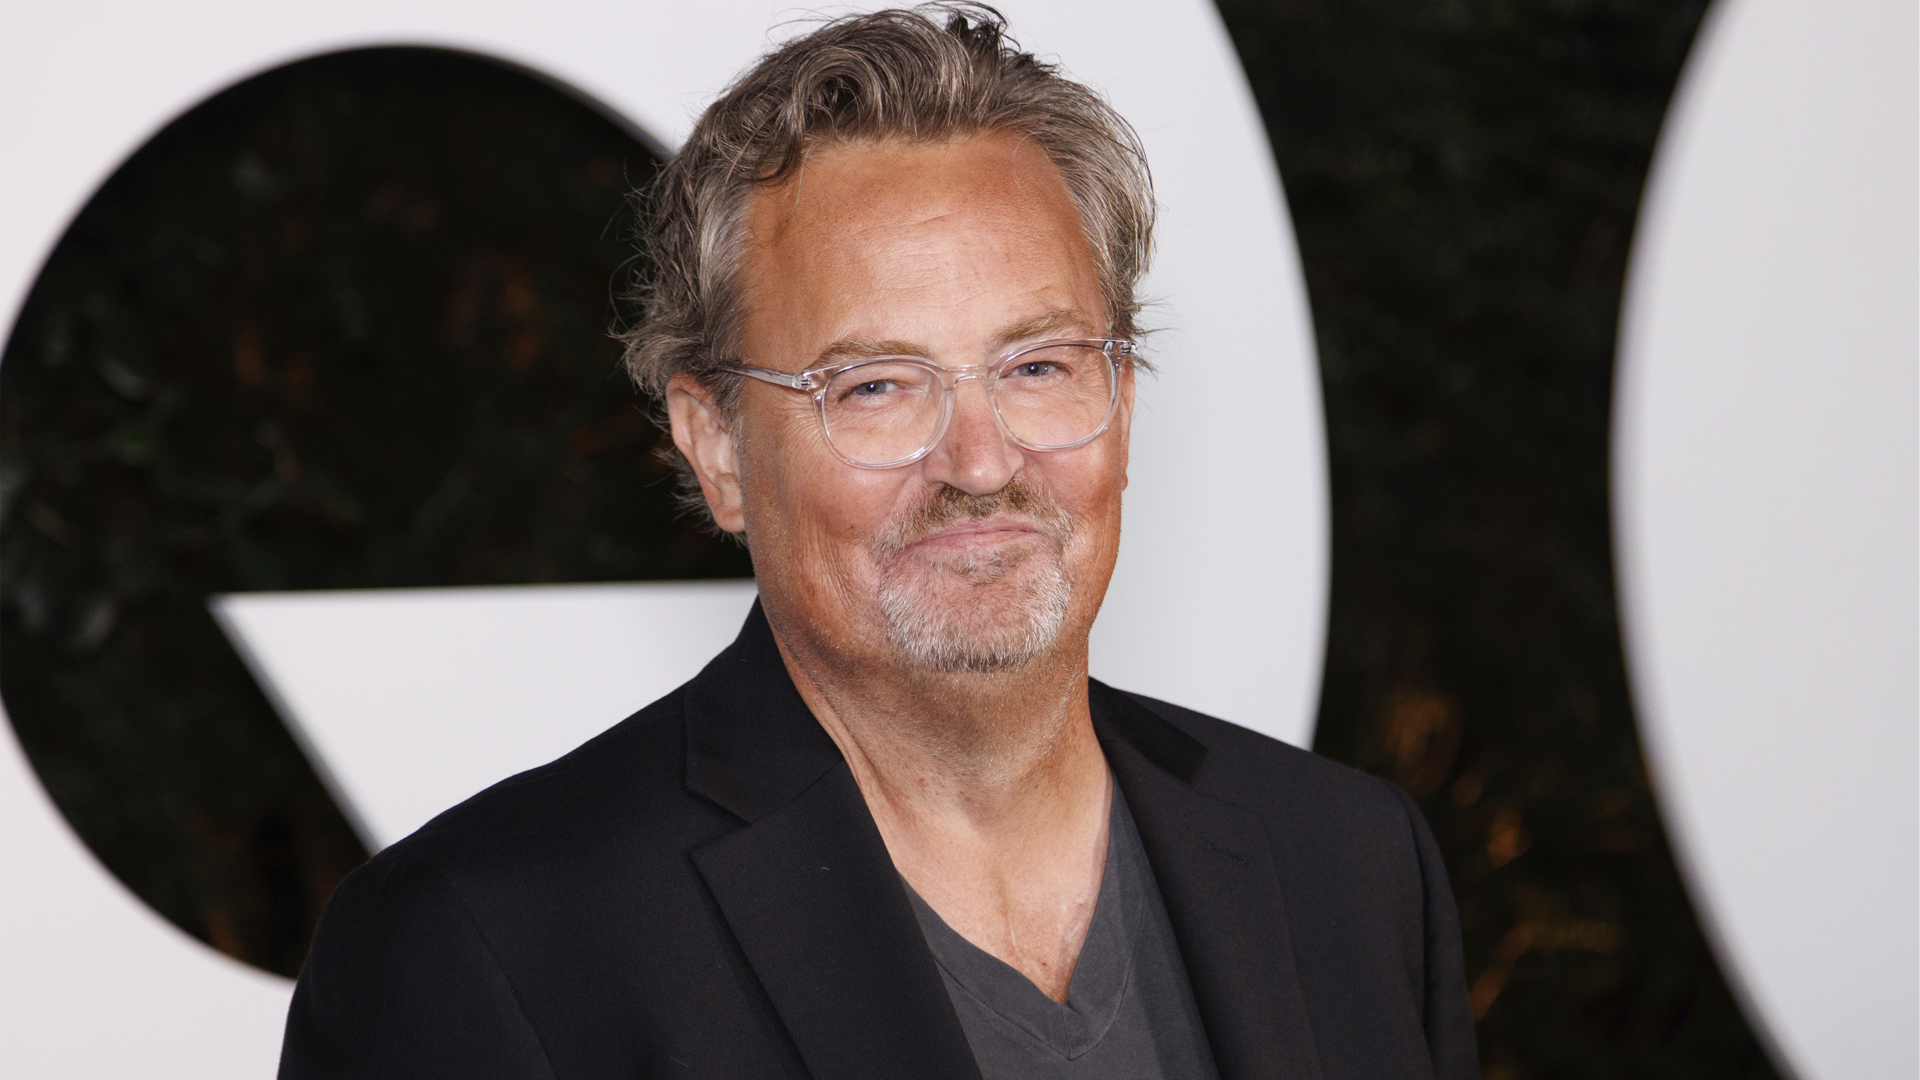 ‘Friends’ Star Matthew Perry Dead at 54 in Apparent Drowning – Report